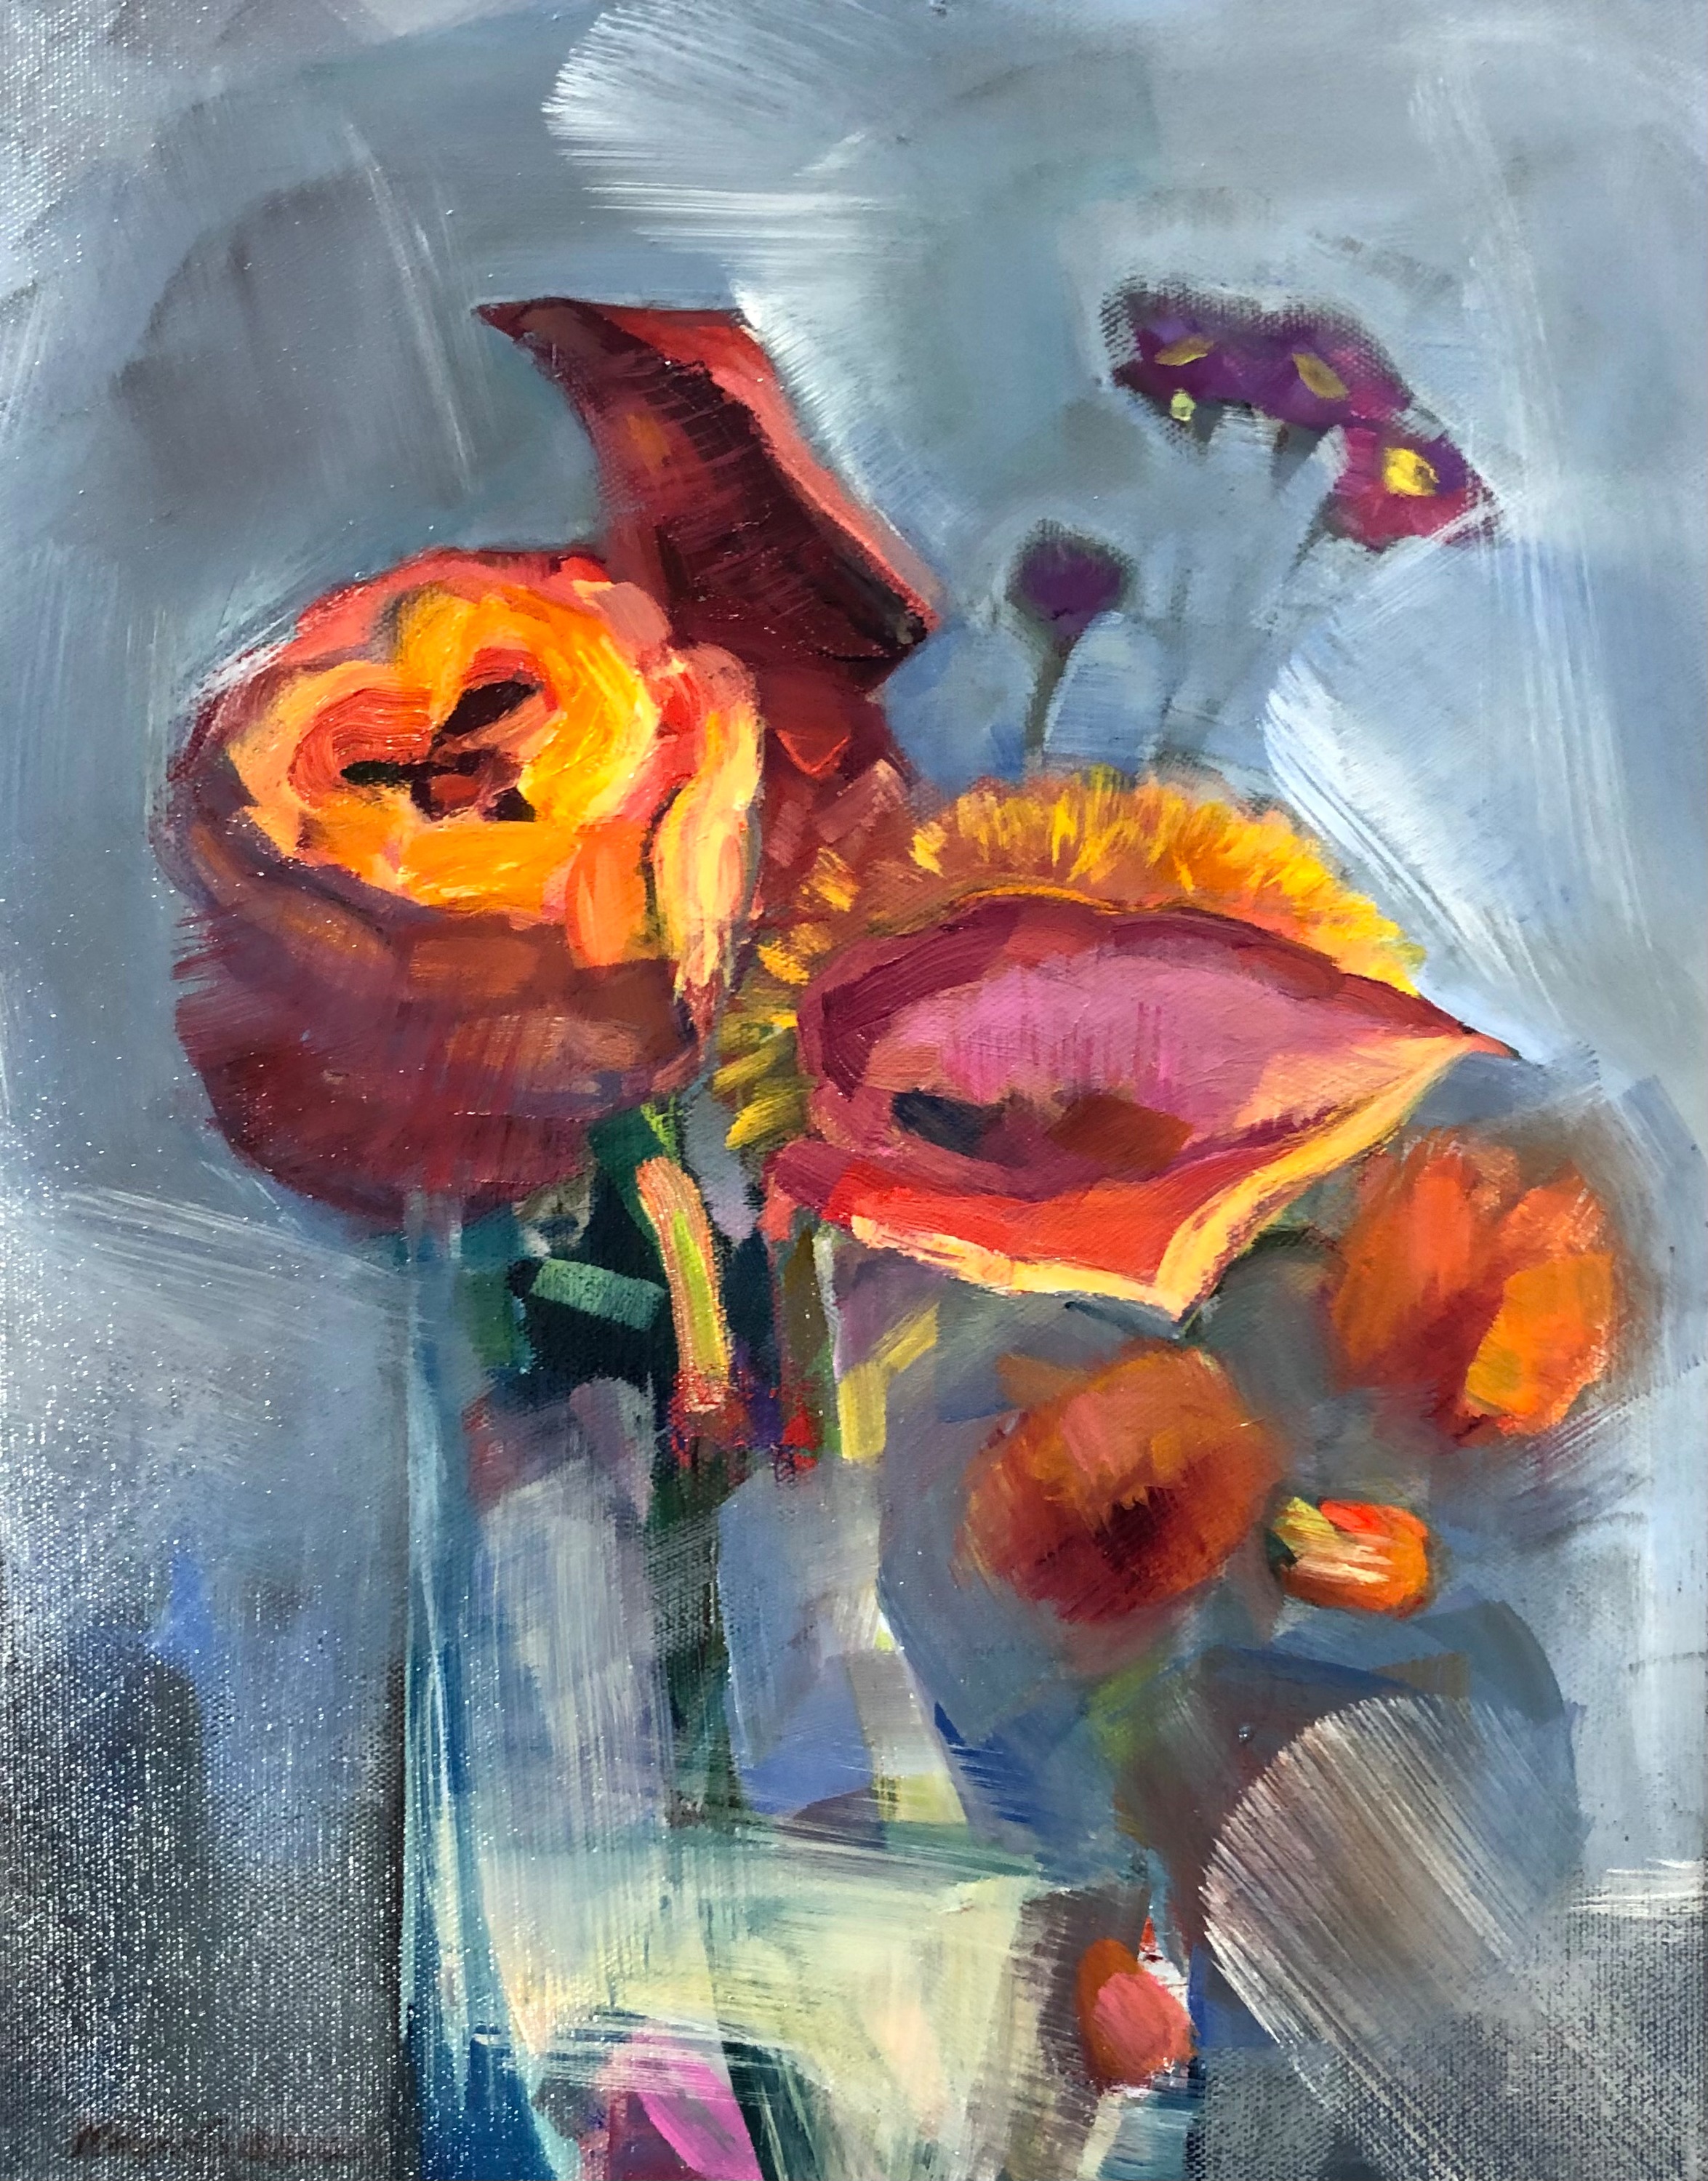 Together still life with calla lilies roses and asters oil on canvas 14x11 e4tmcl